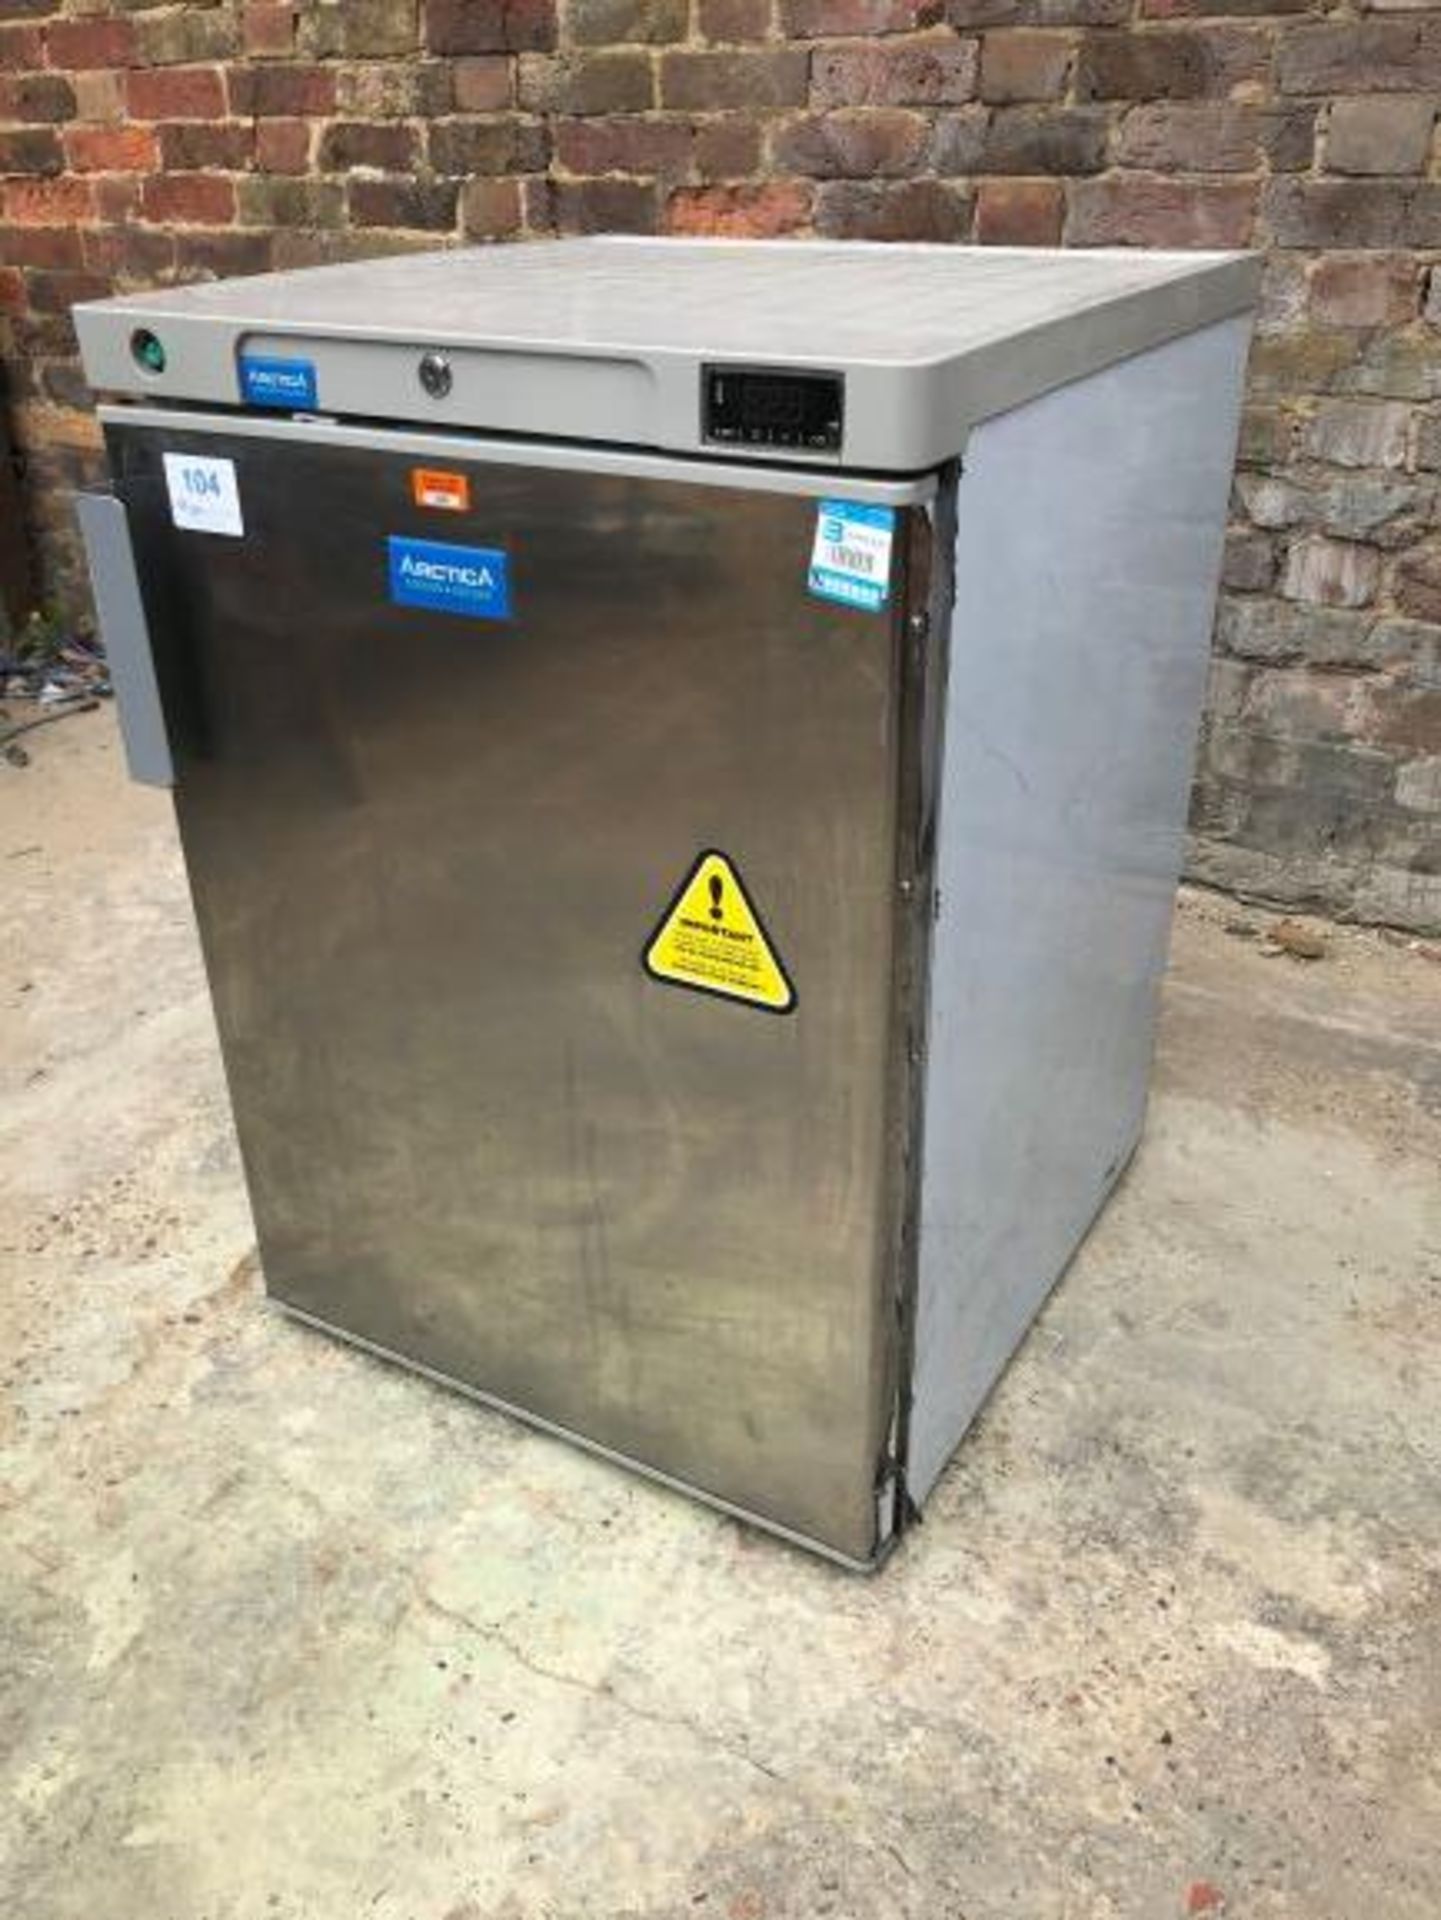 Arctica HEA701 200Ltr Commercial Undercounter Stainless Steel Freezer - Image 2 of 4